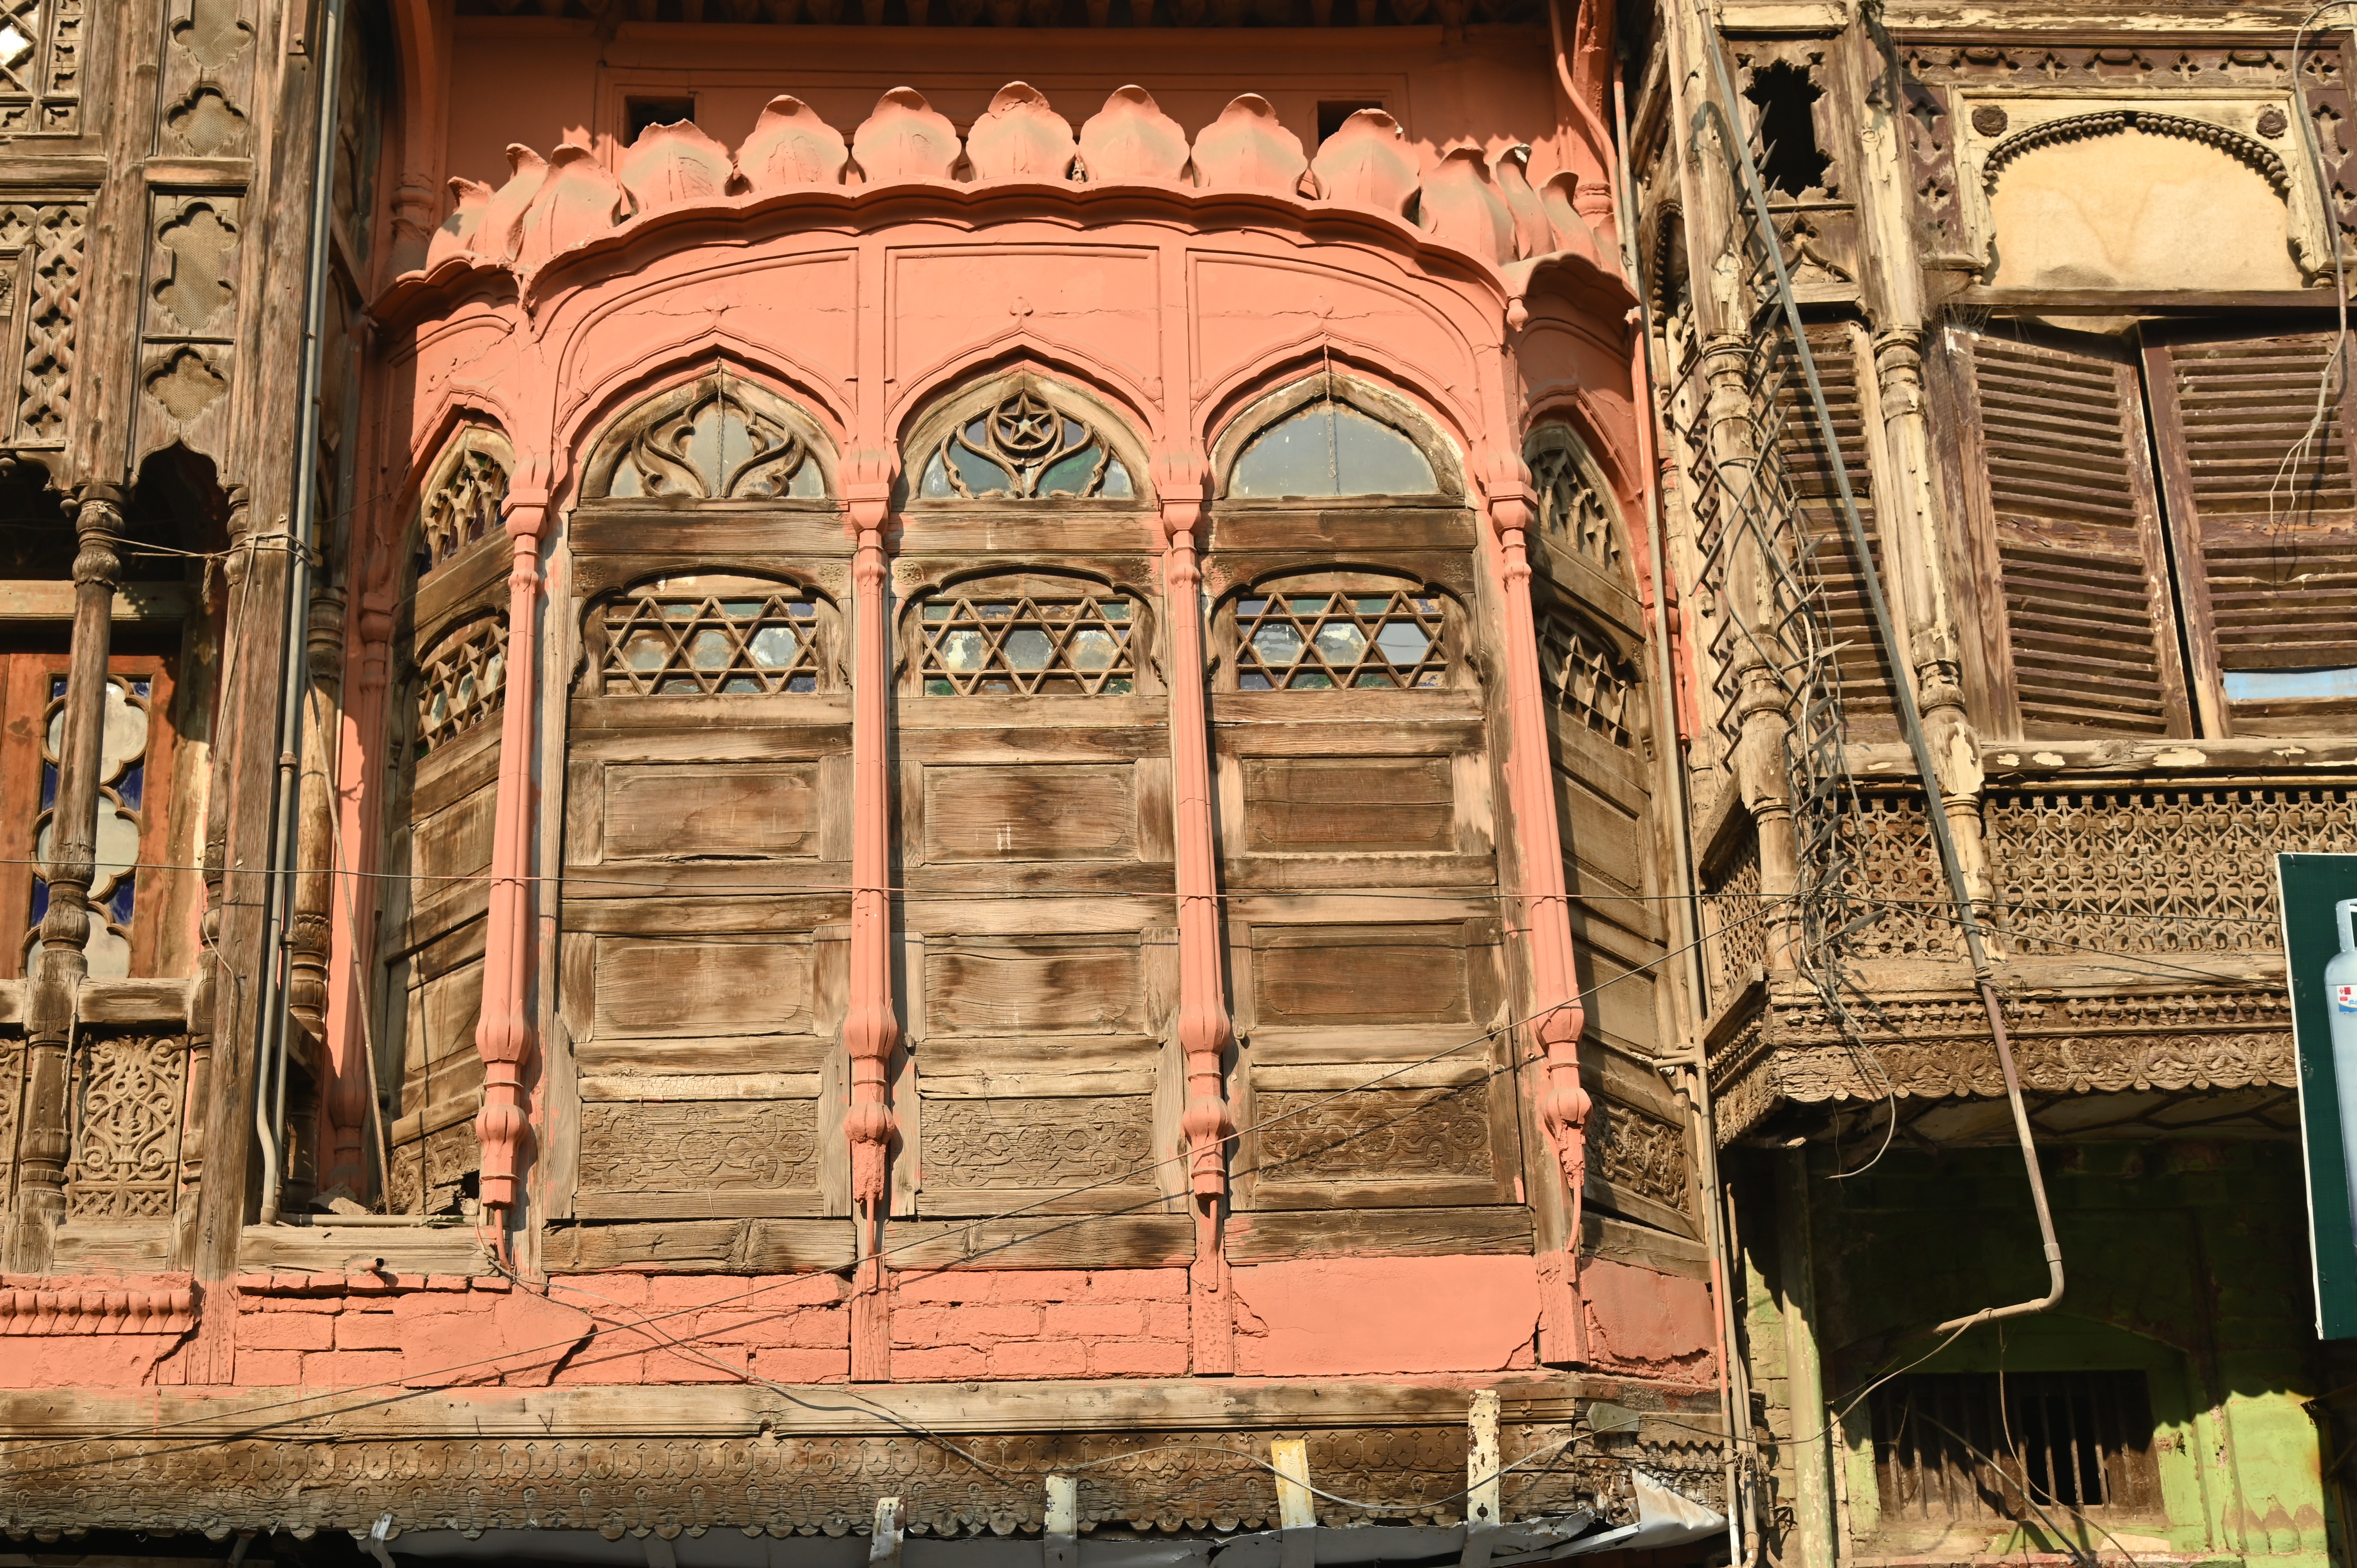 An old fashioned wooden window depicting the ancient culture